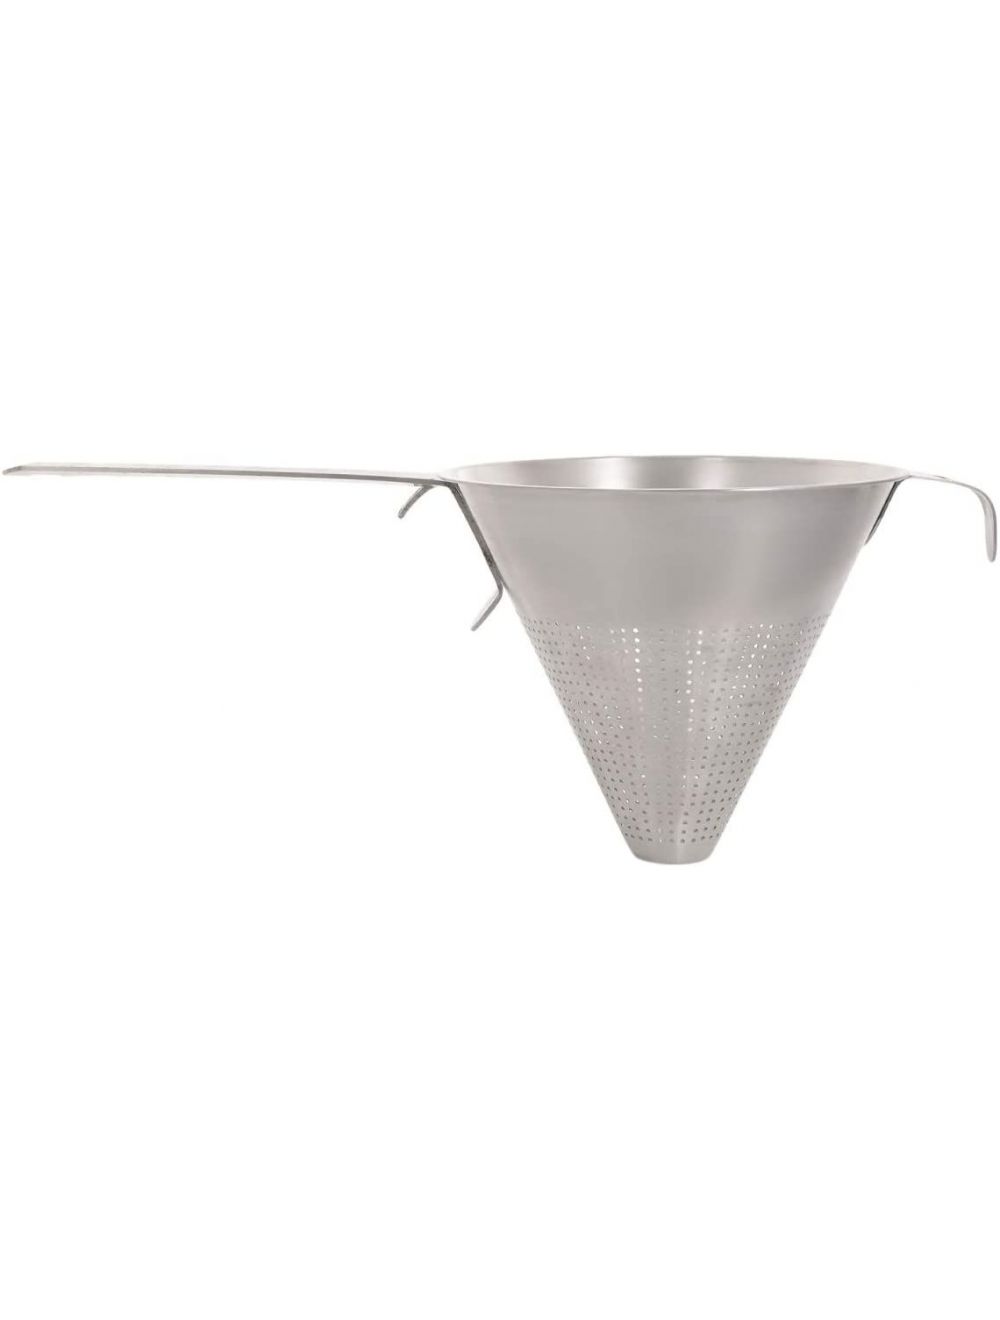 Raj Stainless Steel Conical Strainer, Silver-SCS007